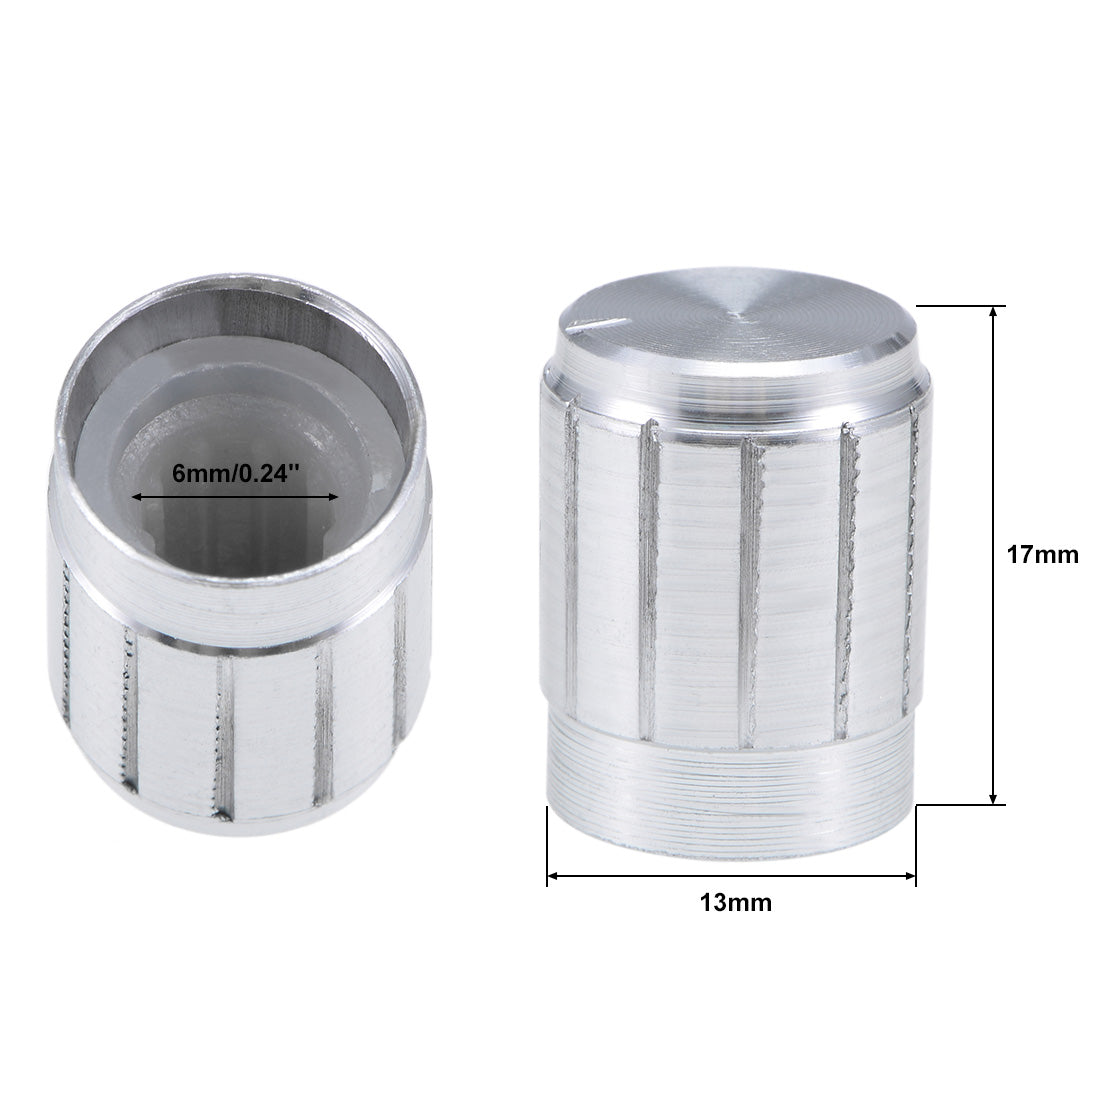 uxcell Uxcell 5Pcs 13x 17mm Aluminium Alloy Potentiometer Volume Control Rotary Knob Knurled Shaft Hole Silver Tone